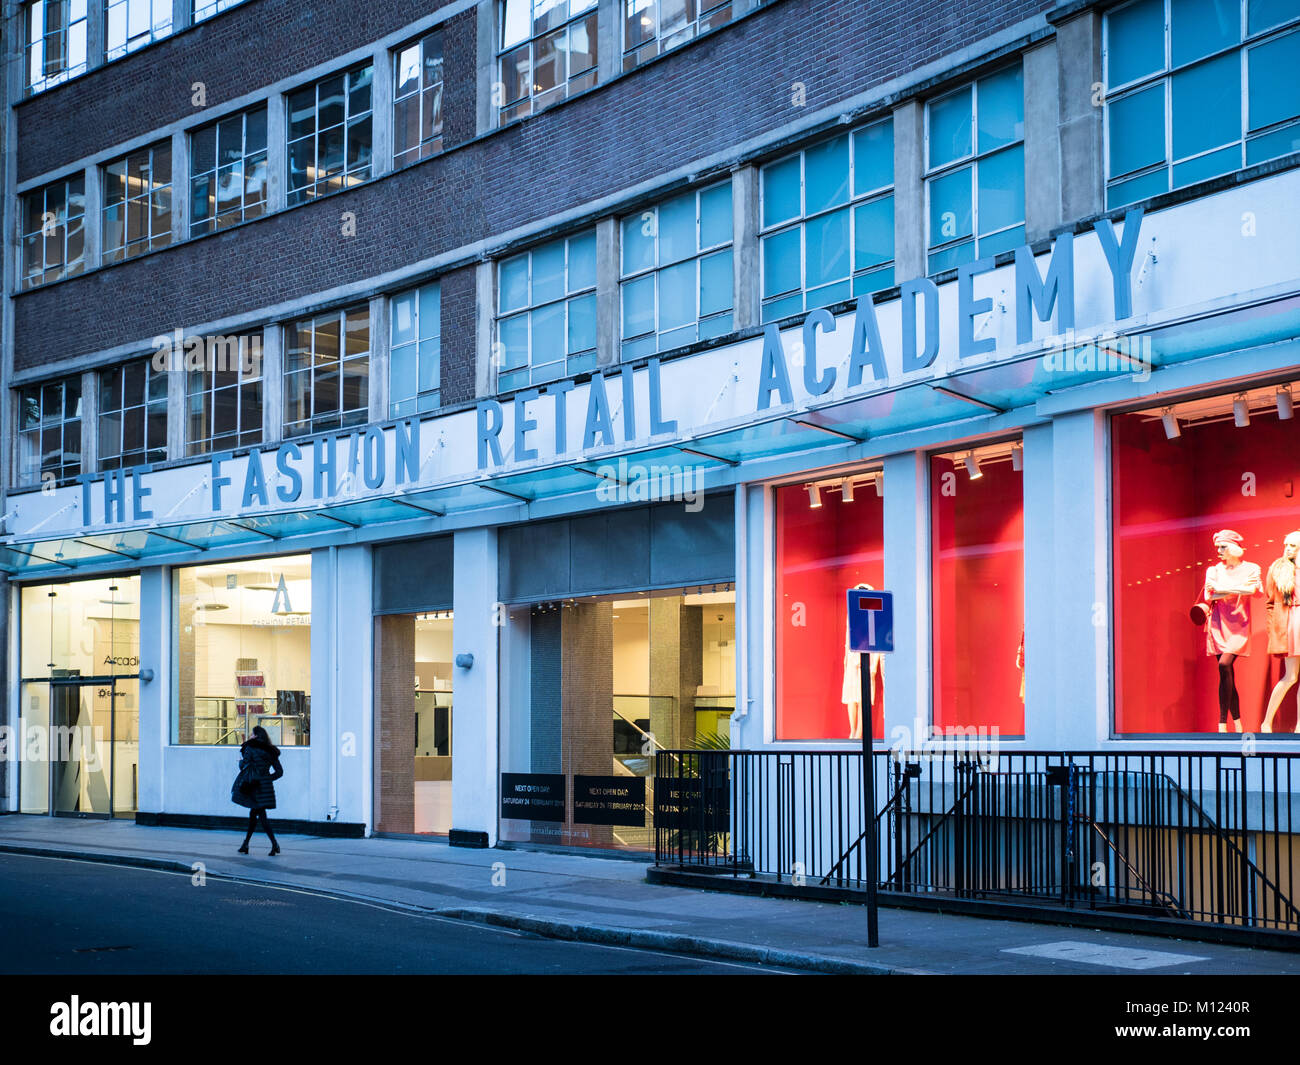 The Fashion Retail Academy in central London UK.  Founded in 2005 it is a vocational training college that trains people to work in fashion retail. Stock Photo